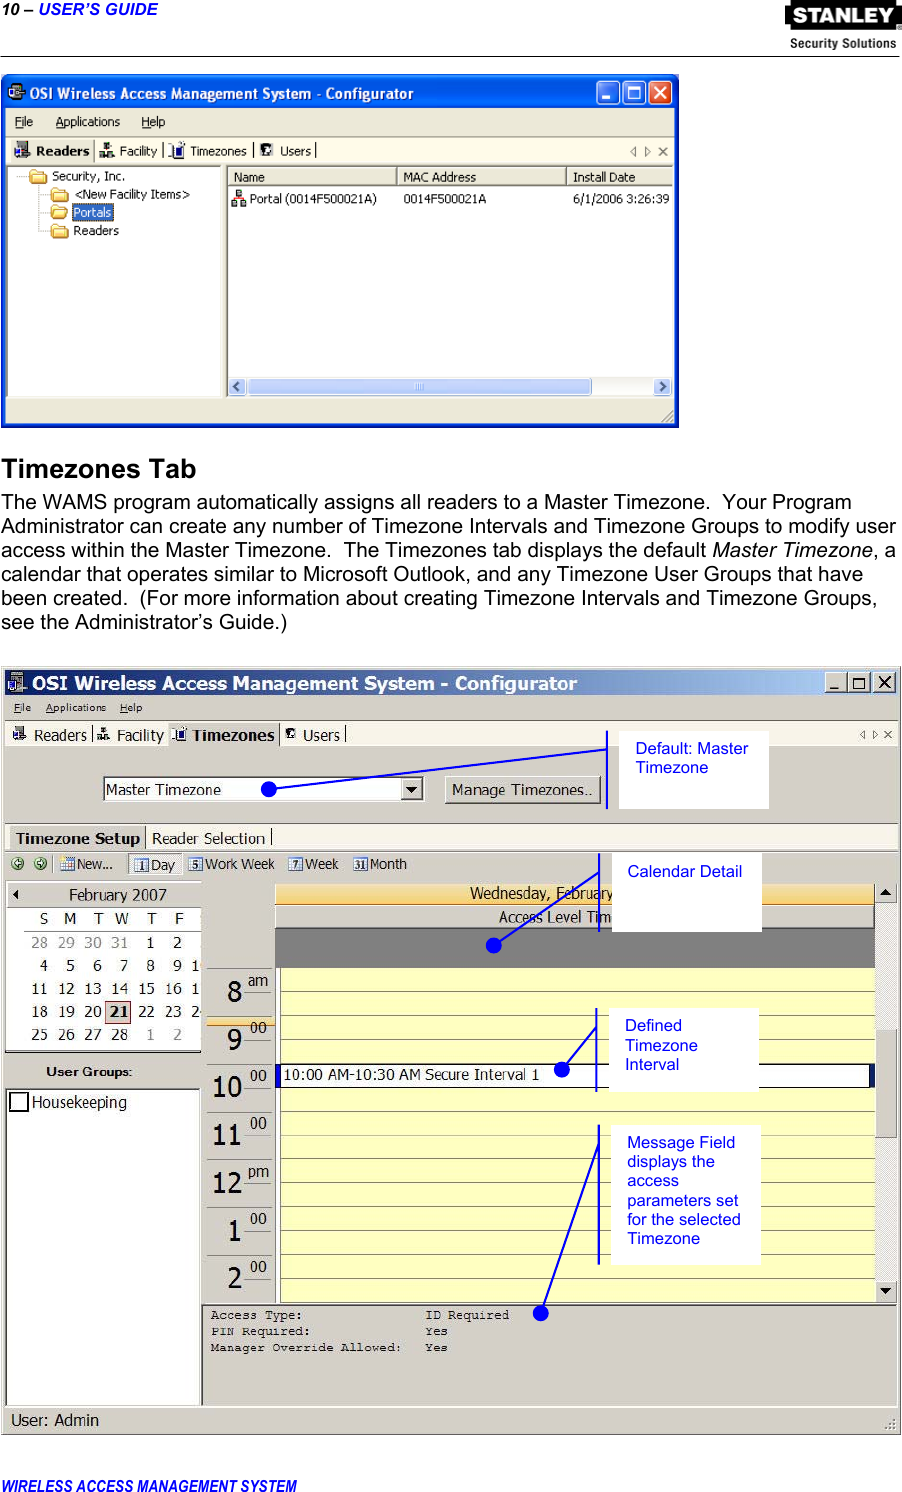 10 – USER’S GUIDE  WIRELESS ACCESS MANAGEMENT SYSTEM  Timezones Tab The WAMS program automatically assigns all readers to a Master Timezone.  Your Program Administrator can create any number of Timezone Intervals and Timezone Groups to modify user access within the Master Timezone.  The Timezones tab displays the default Master Timezone, a calendar that operates similar to Microsoft Outlook, and any Timezone User Groups that have been created.  (For more information about creating Timezone Intervals and Timezone Groups, see the Administrator’s Guide.)   Default: Master Timezone  Defined Timezone Interval Calendar Detail Message Field displays the access parameters set for the selected Timezone  